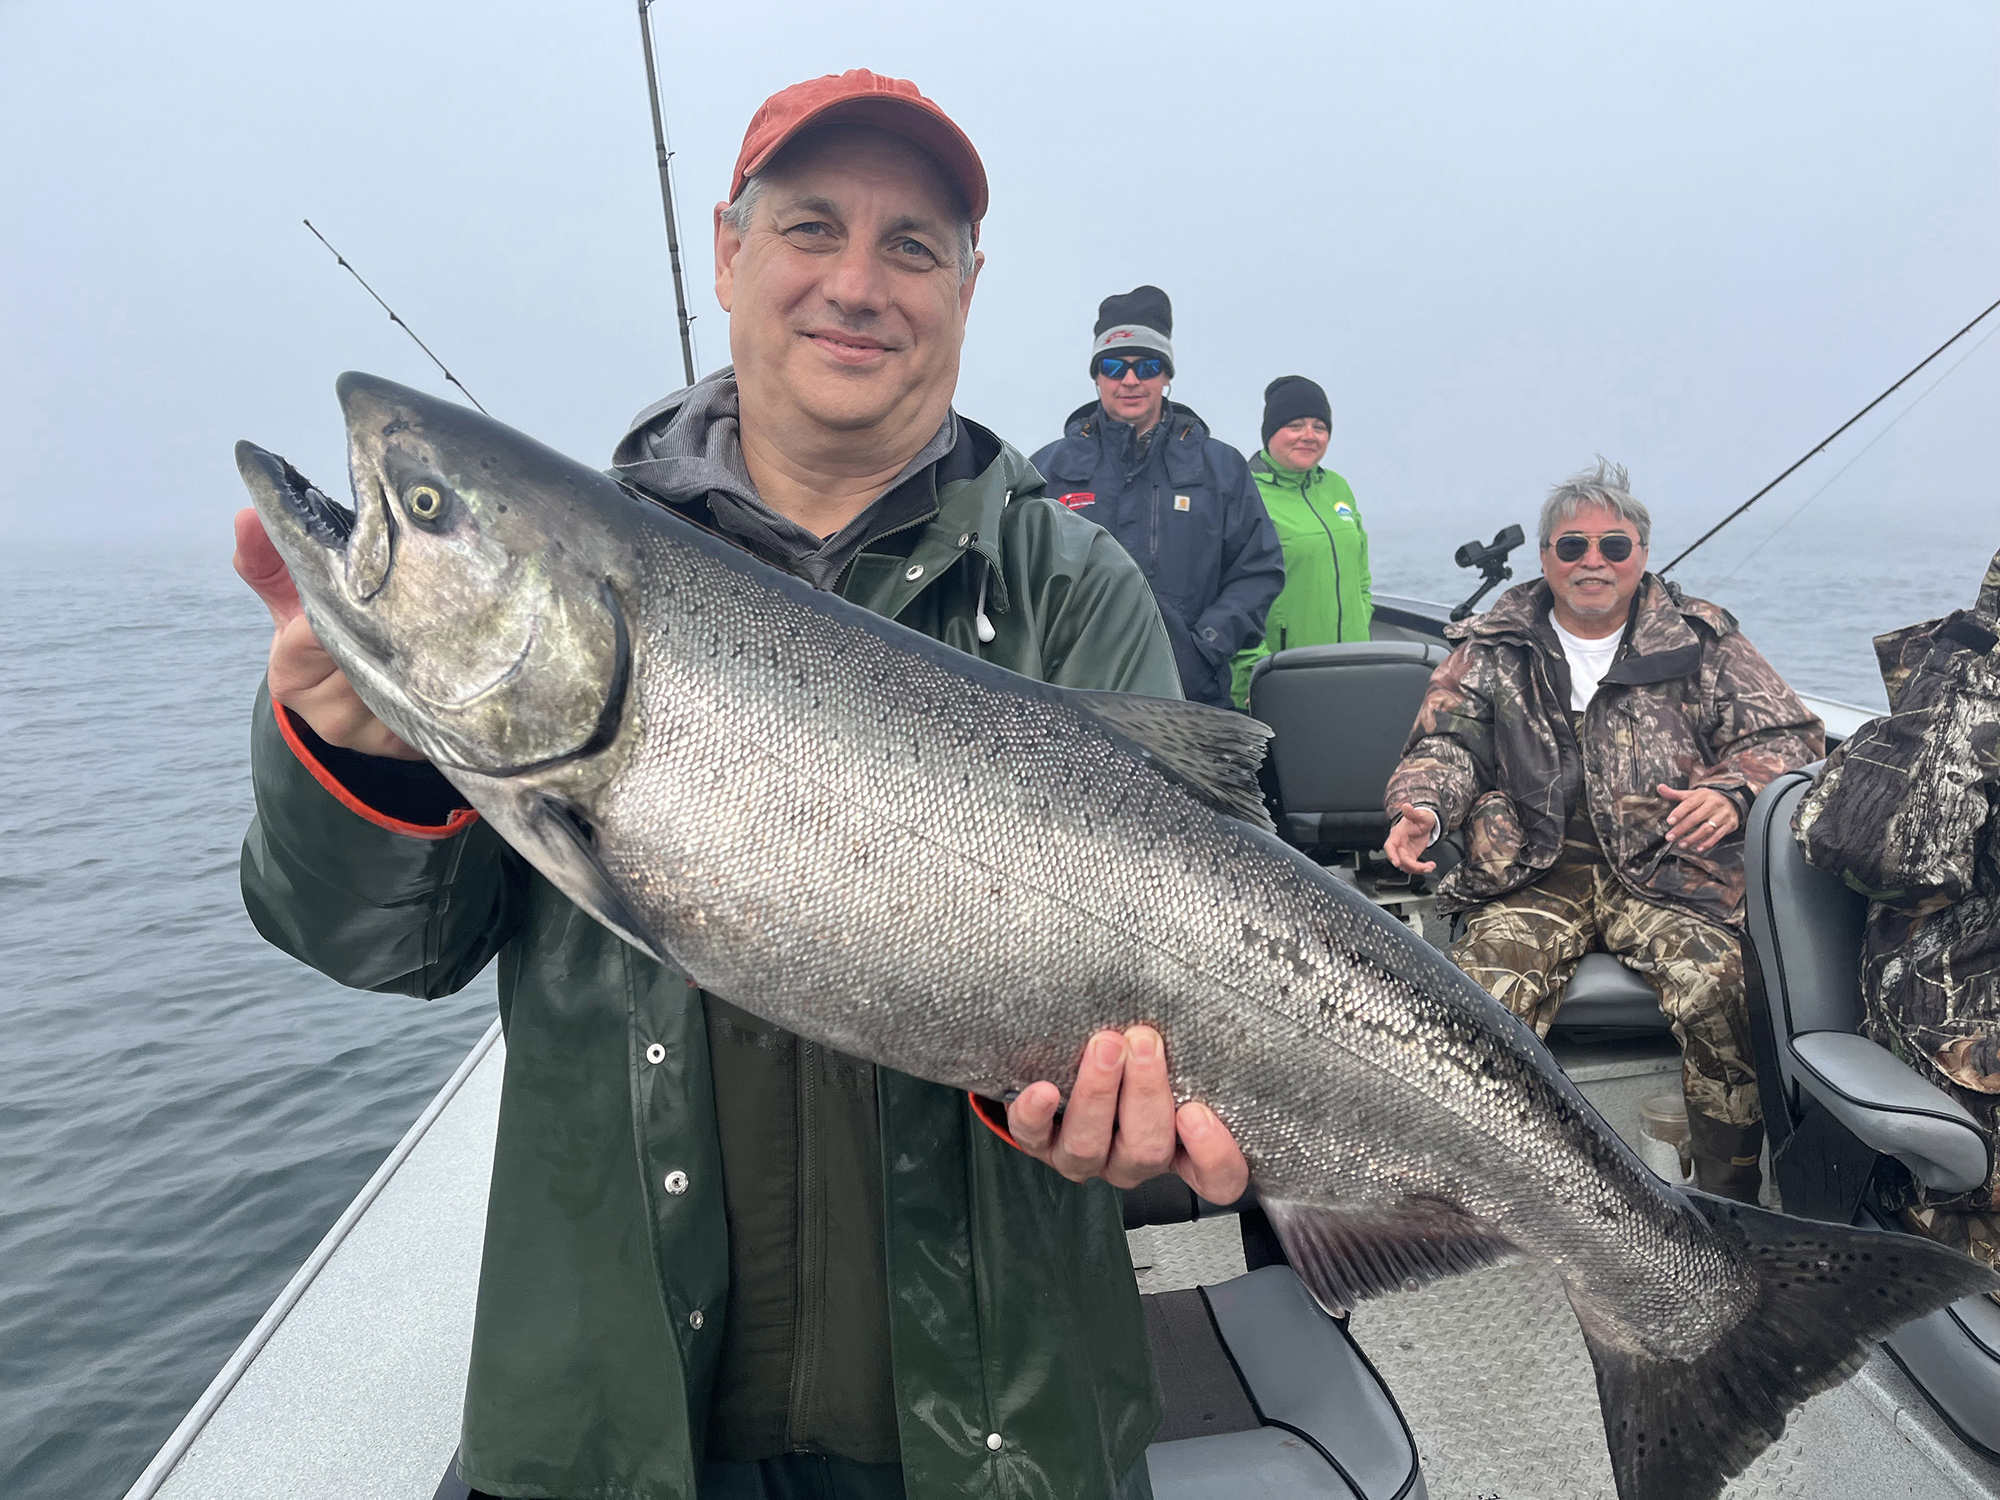 Chinook salmon fishing reopens Friday at Buoy 10 - The Columbian